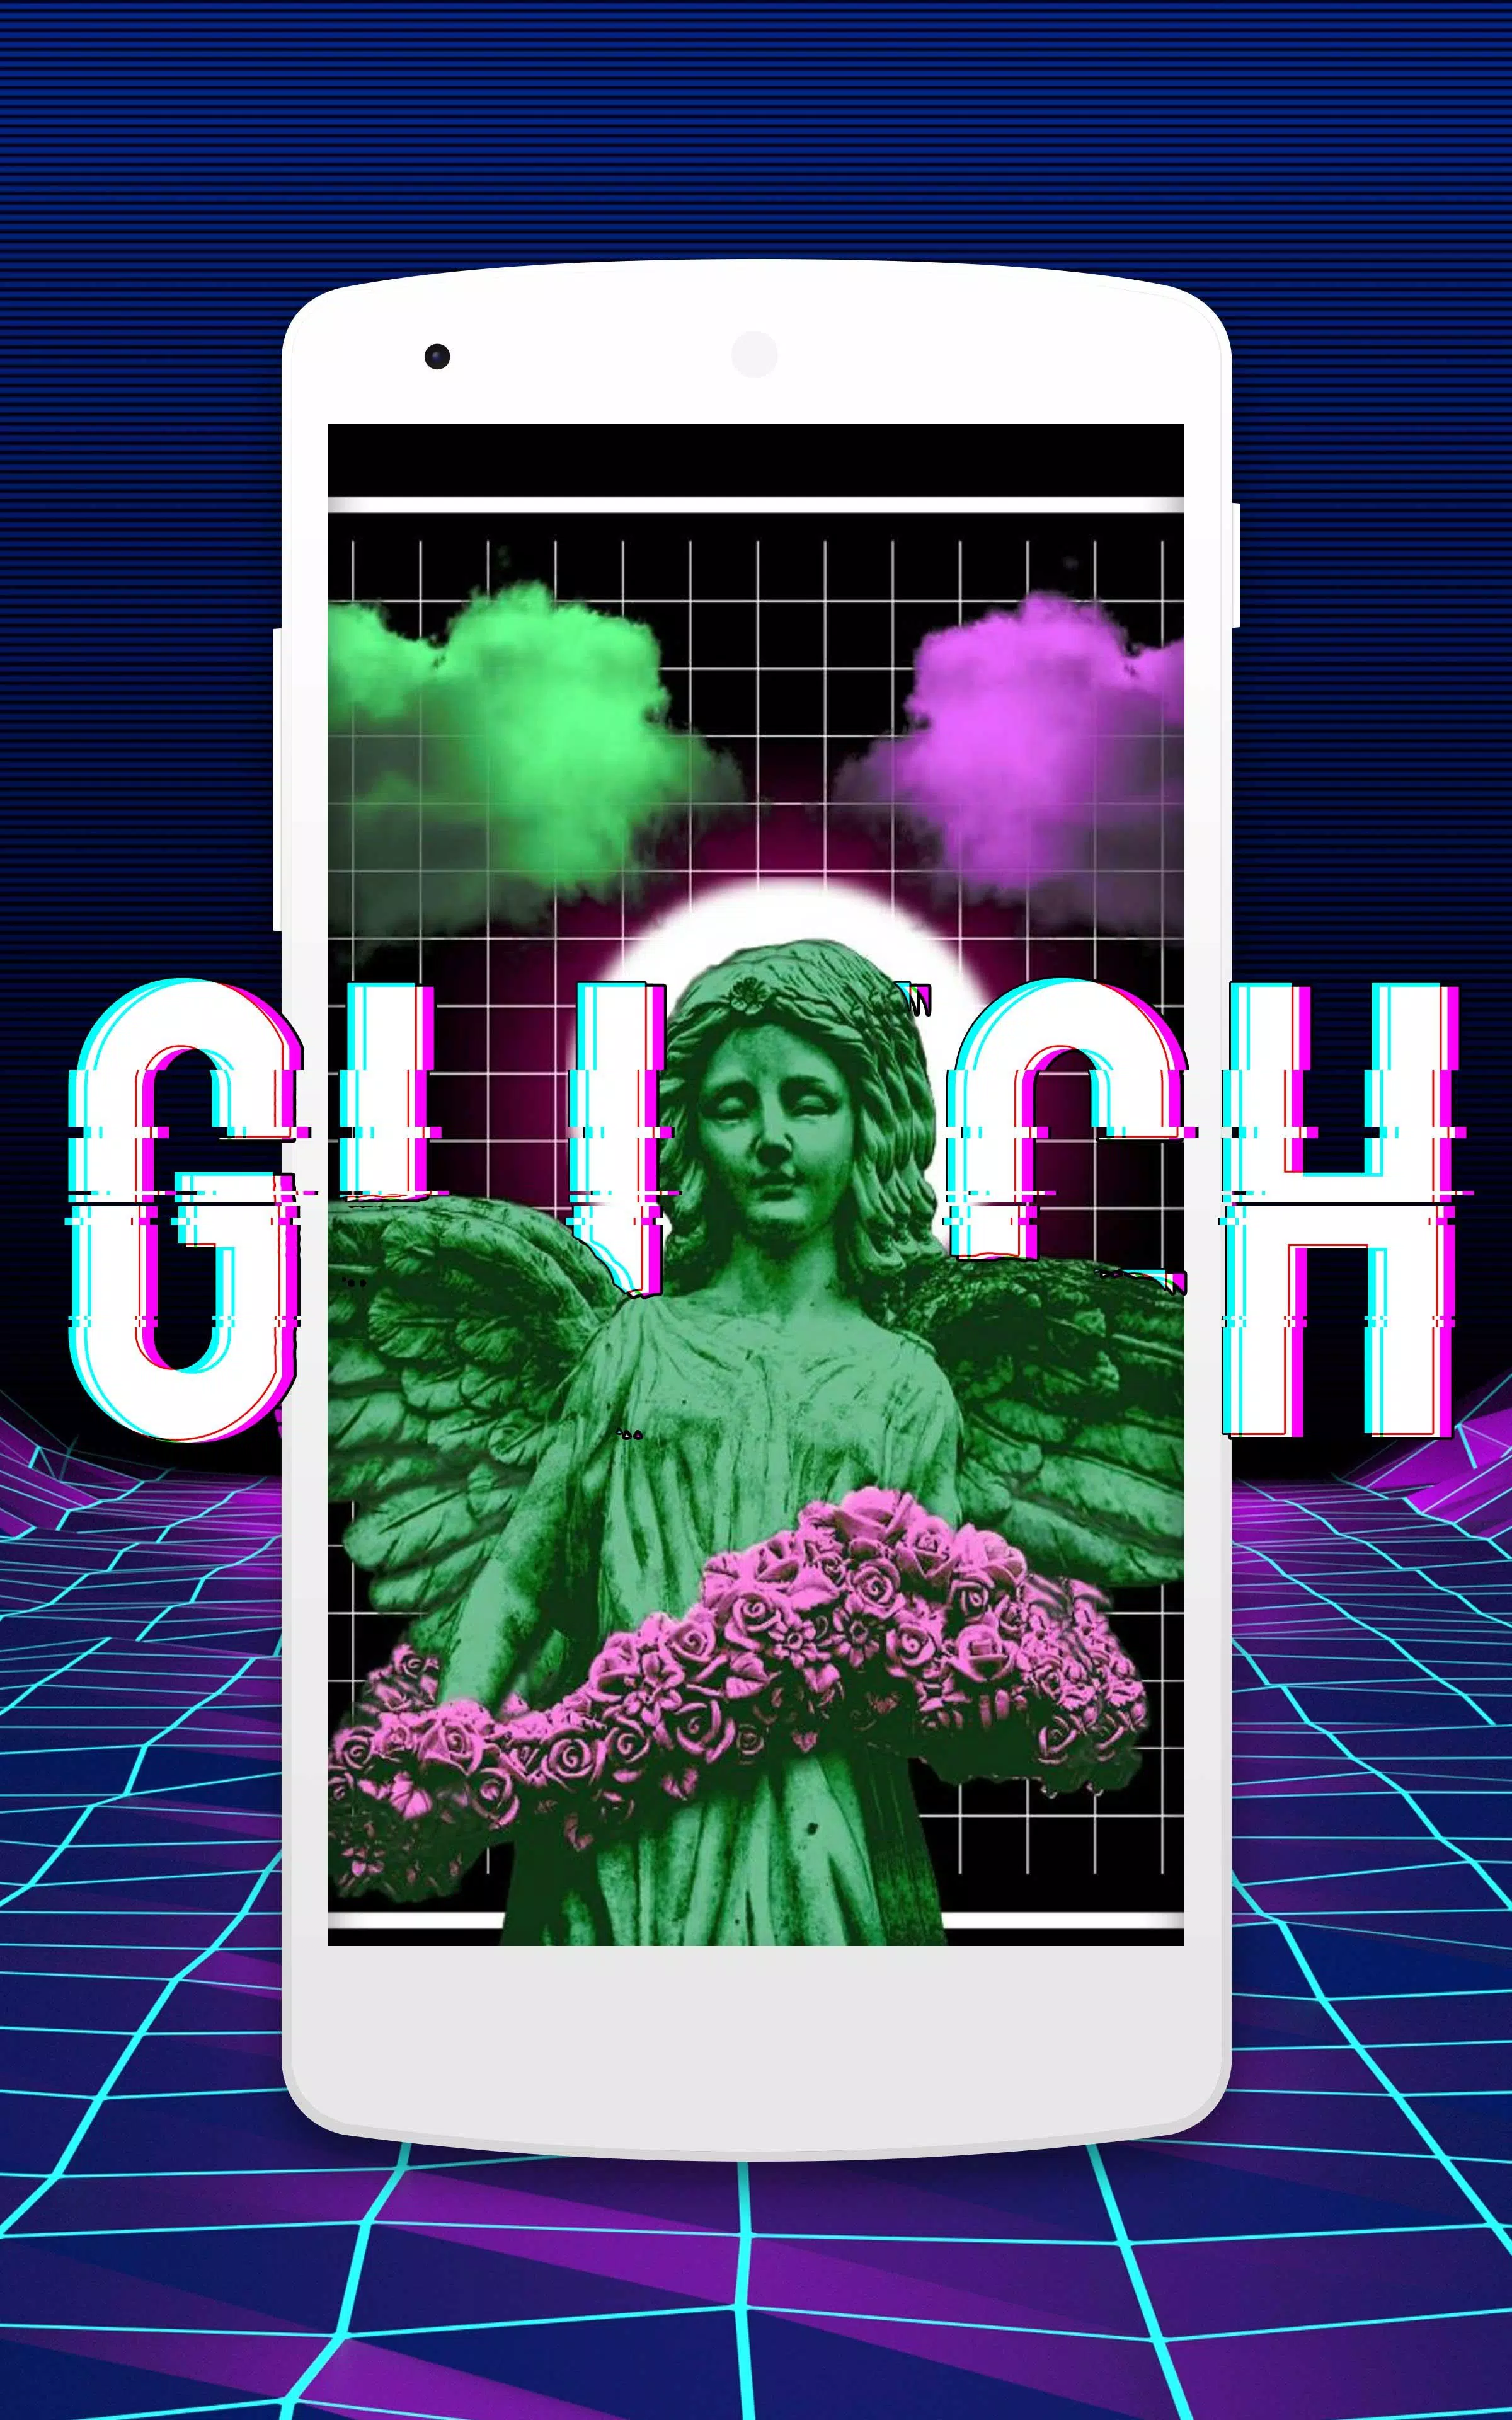 Hangen neef plotseling GLITCH EFFECT AESTHETIC Wallpapers HD APK pour Android Télécharger